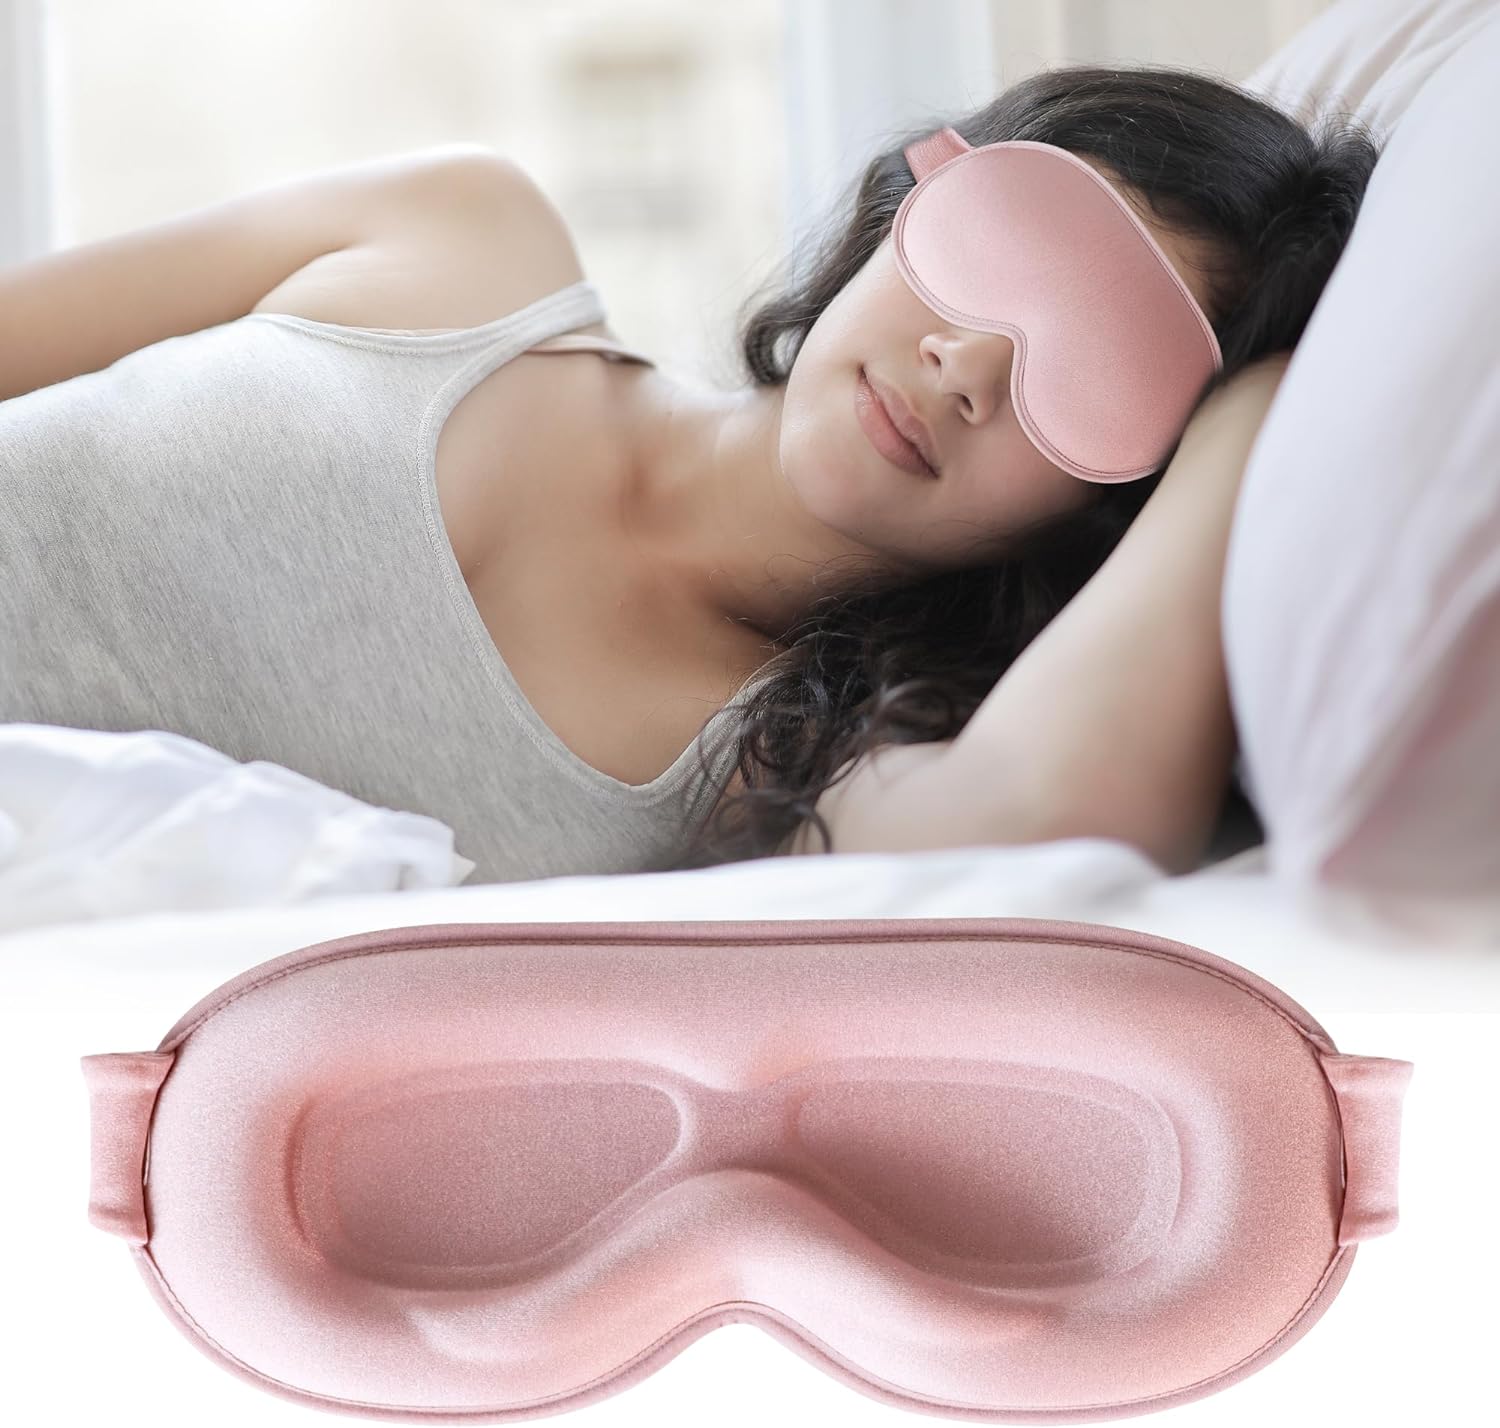 Sleep Mask,Upgraded 3D Deep Contoured Eye Mask for Sleeping,No Pressure Eye Covers 99% Block Out Light Eye Mask with Adjustable Elastic Strap for Sleeping, Yoga, Traveling (1pc,Pink)